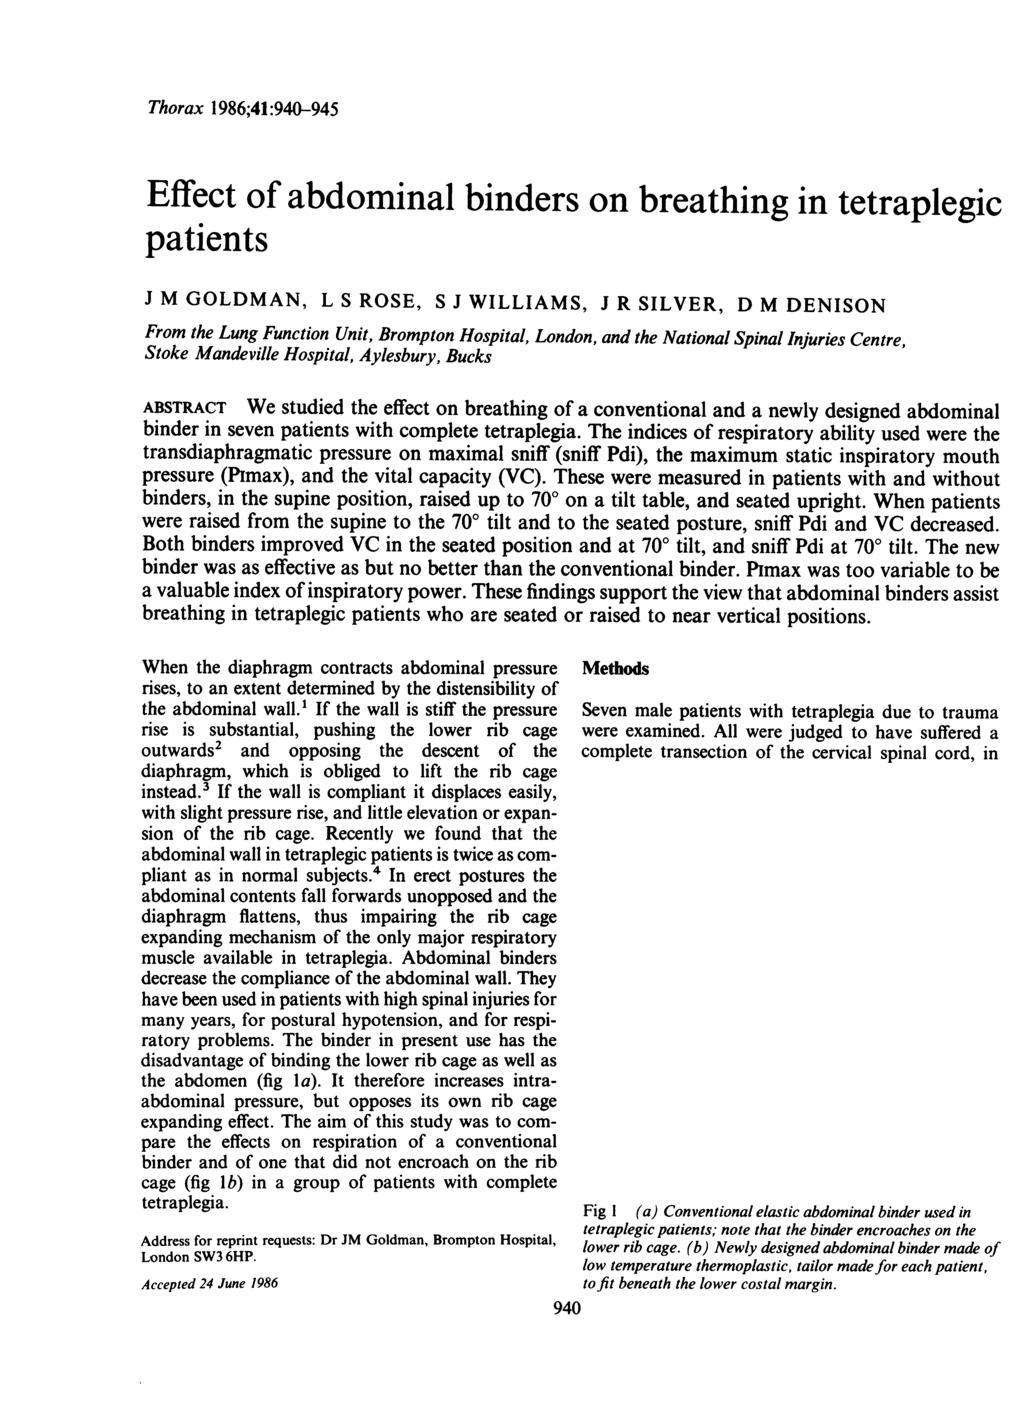 Thorax 1986;41:940-945 Effect of abdominal binders on breathing in tetraplegic patients J M GOLDMAN, L S ROSE, S J WILLIAMS, J R SILVER, D M DENISON From the Lung Function Unit, Brompton Hospital,